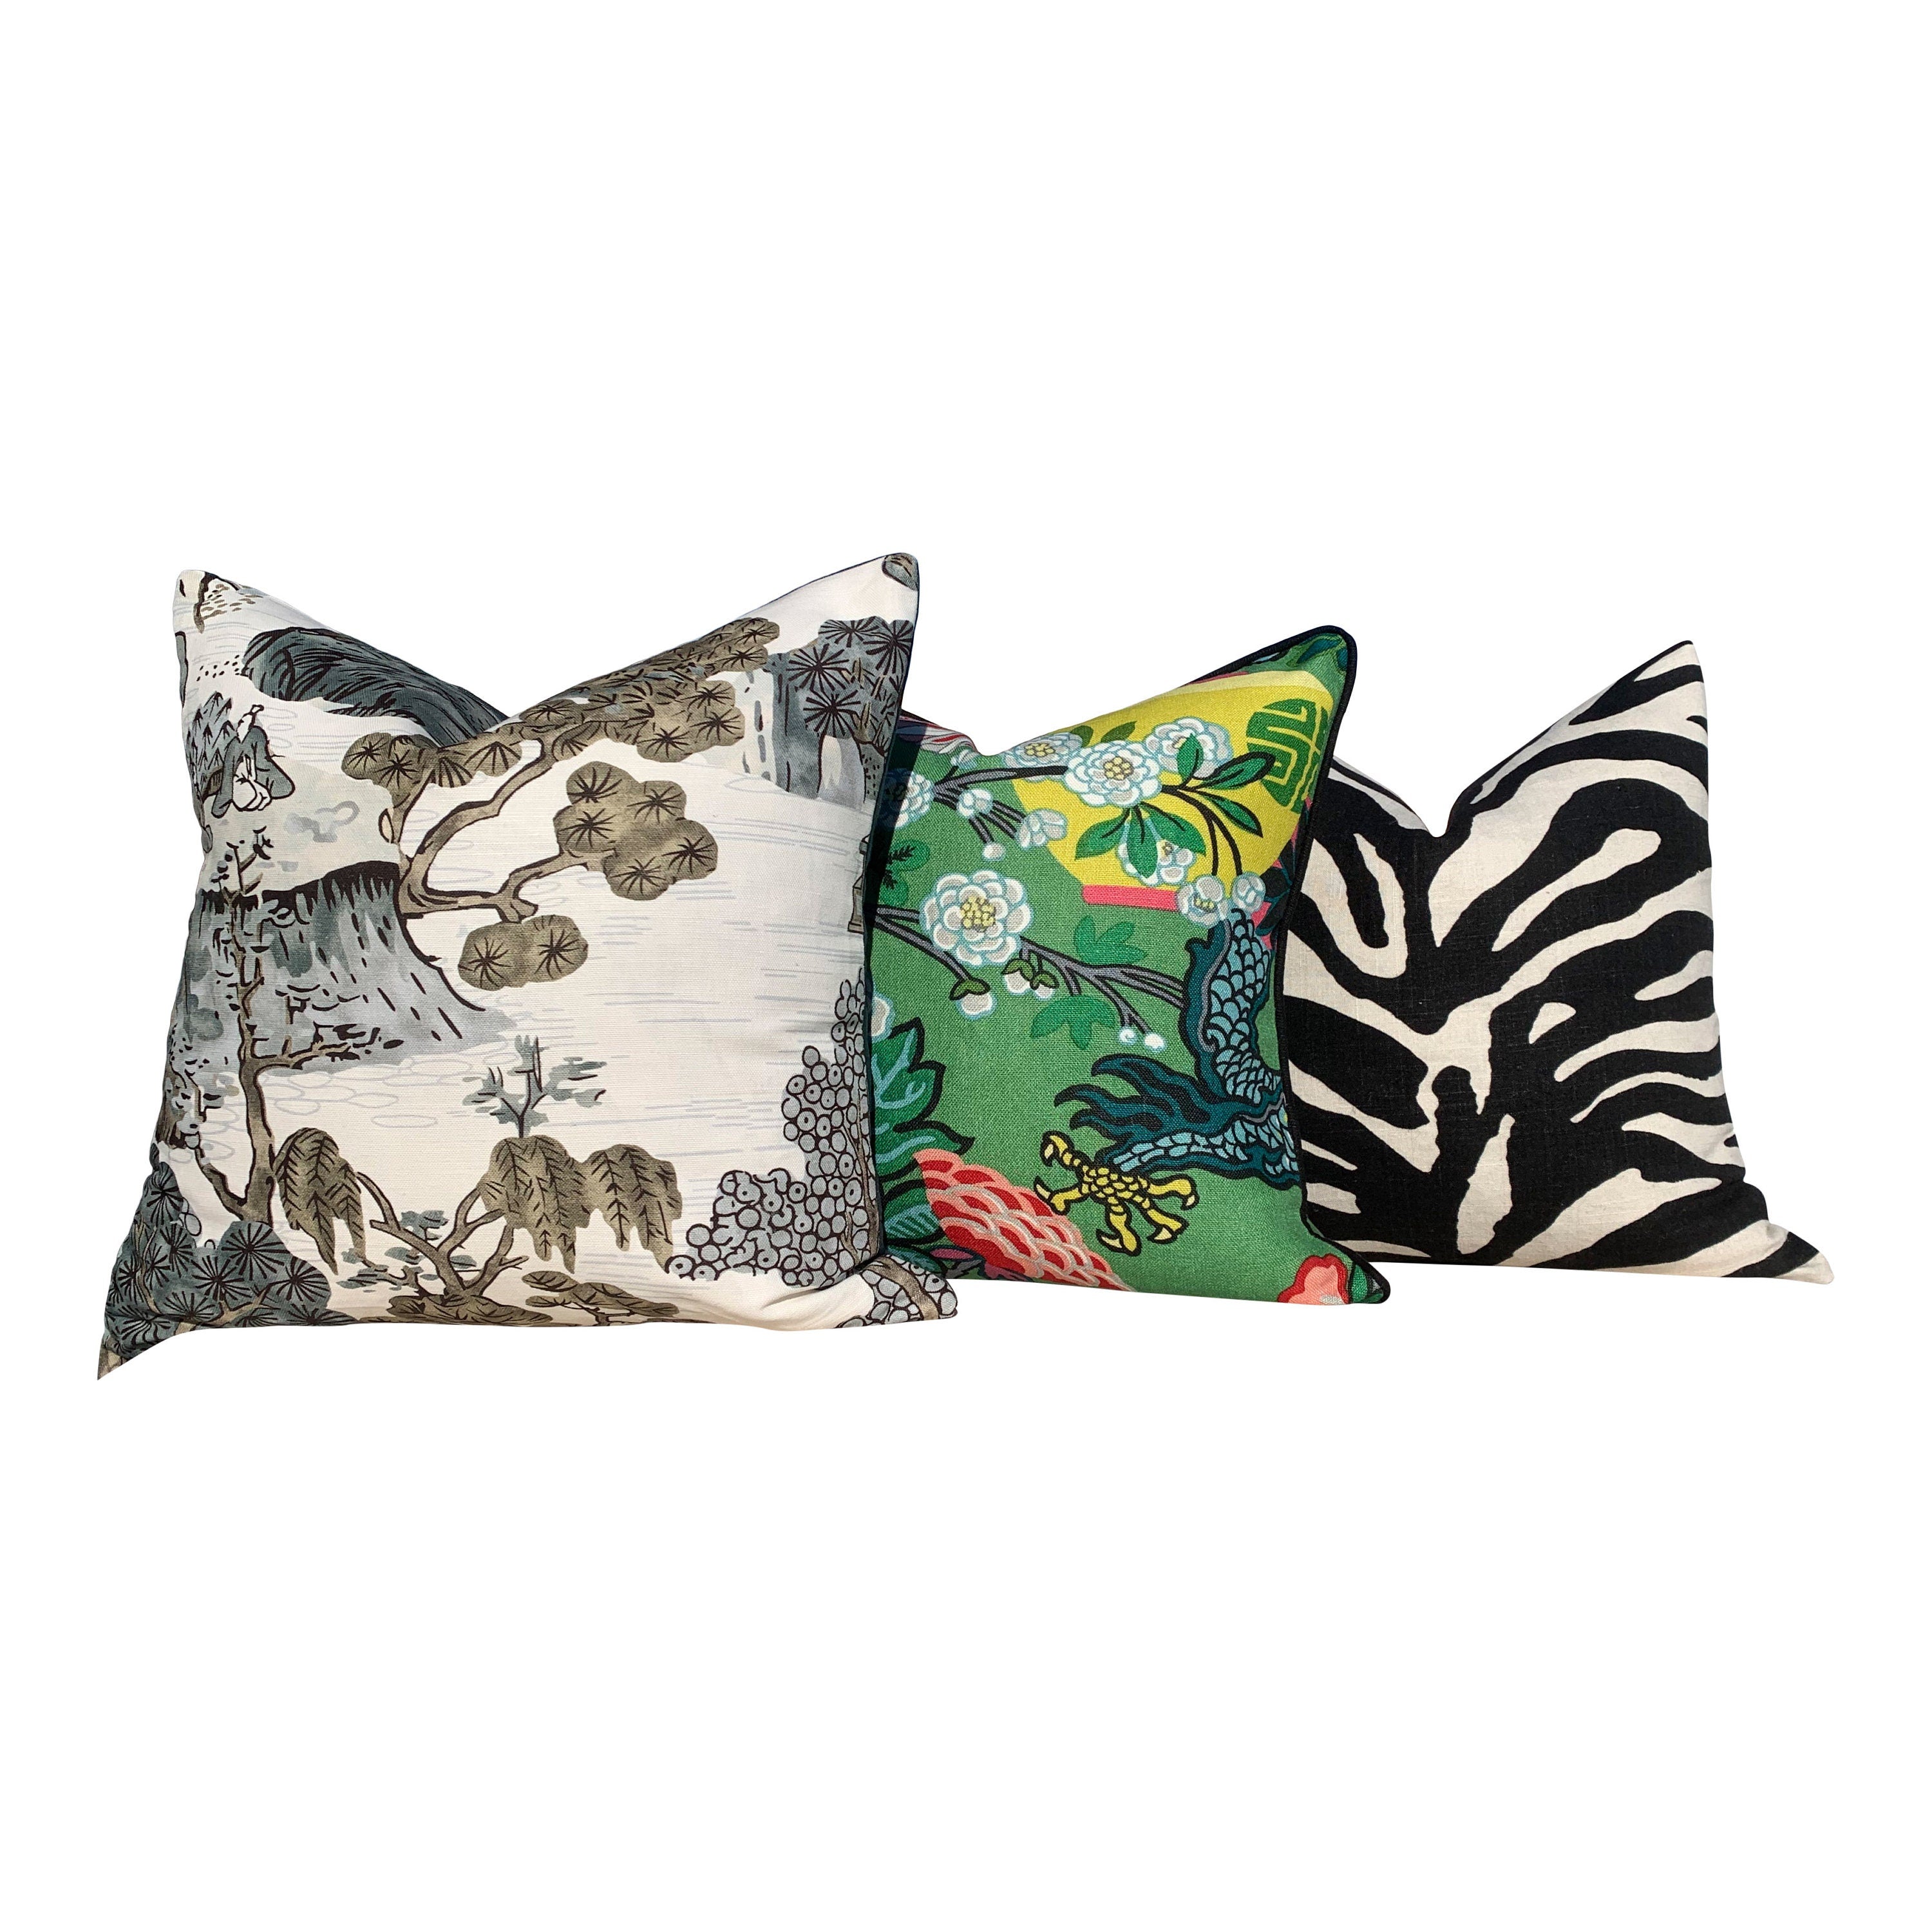 Thibaut "Asian Scenic" Pillow In Gray. Chinoiserie Lumbar Decorative Pillow in Gray.